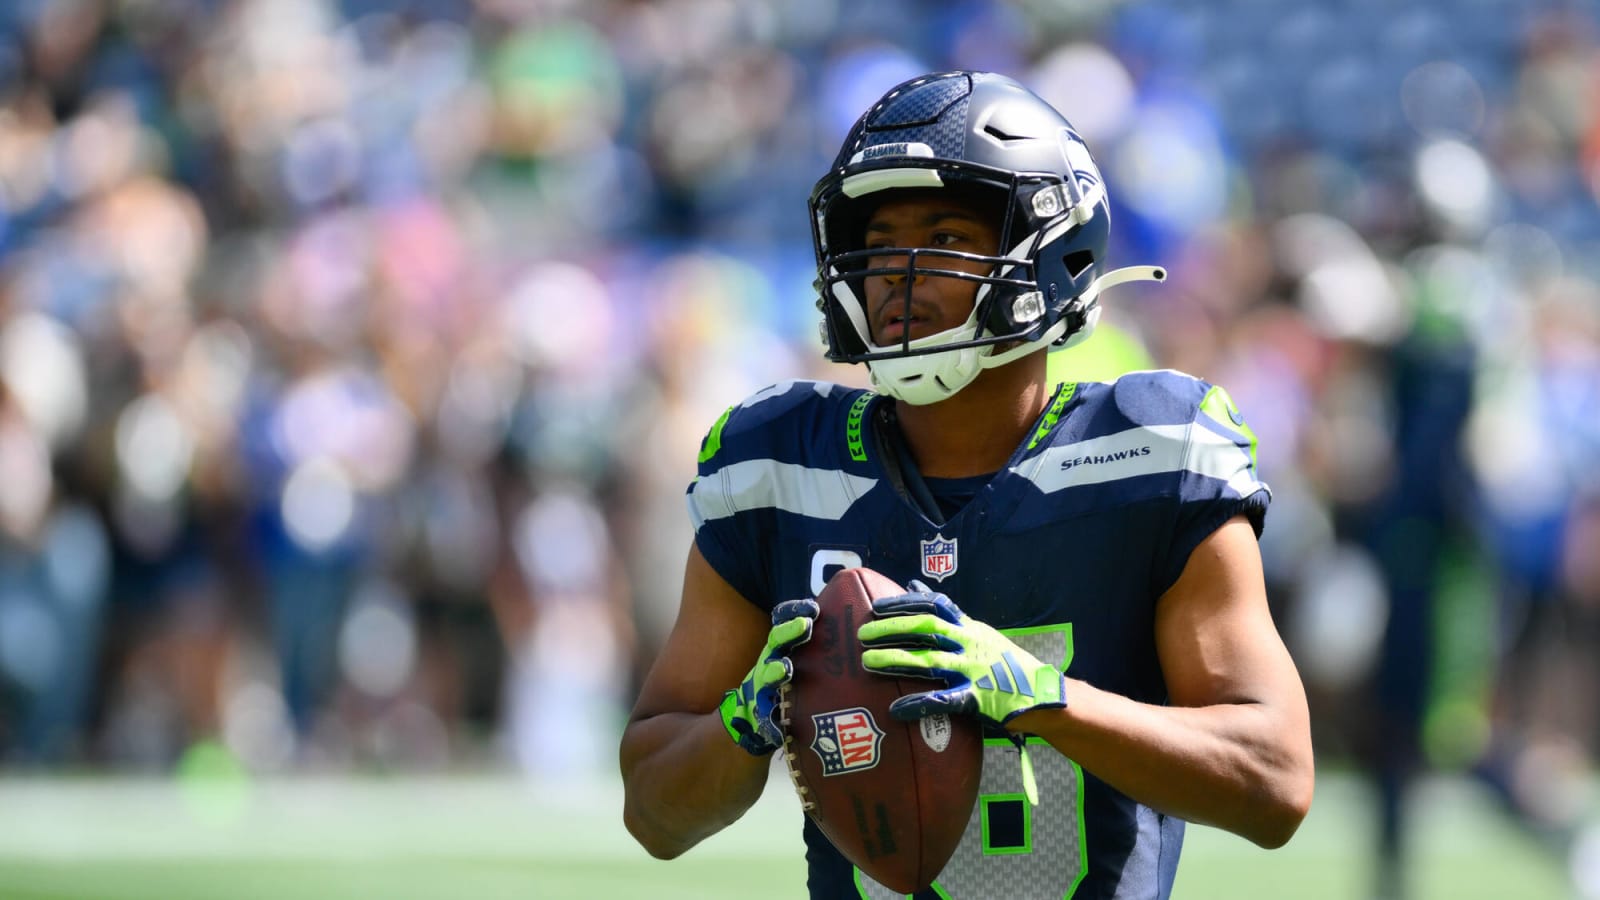 NFL writer suggests Bears should trade for Seahawks wide receiver